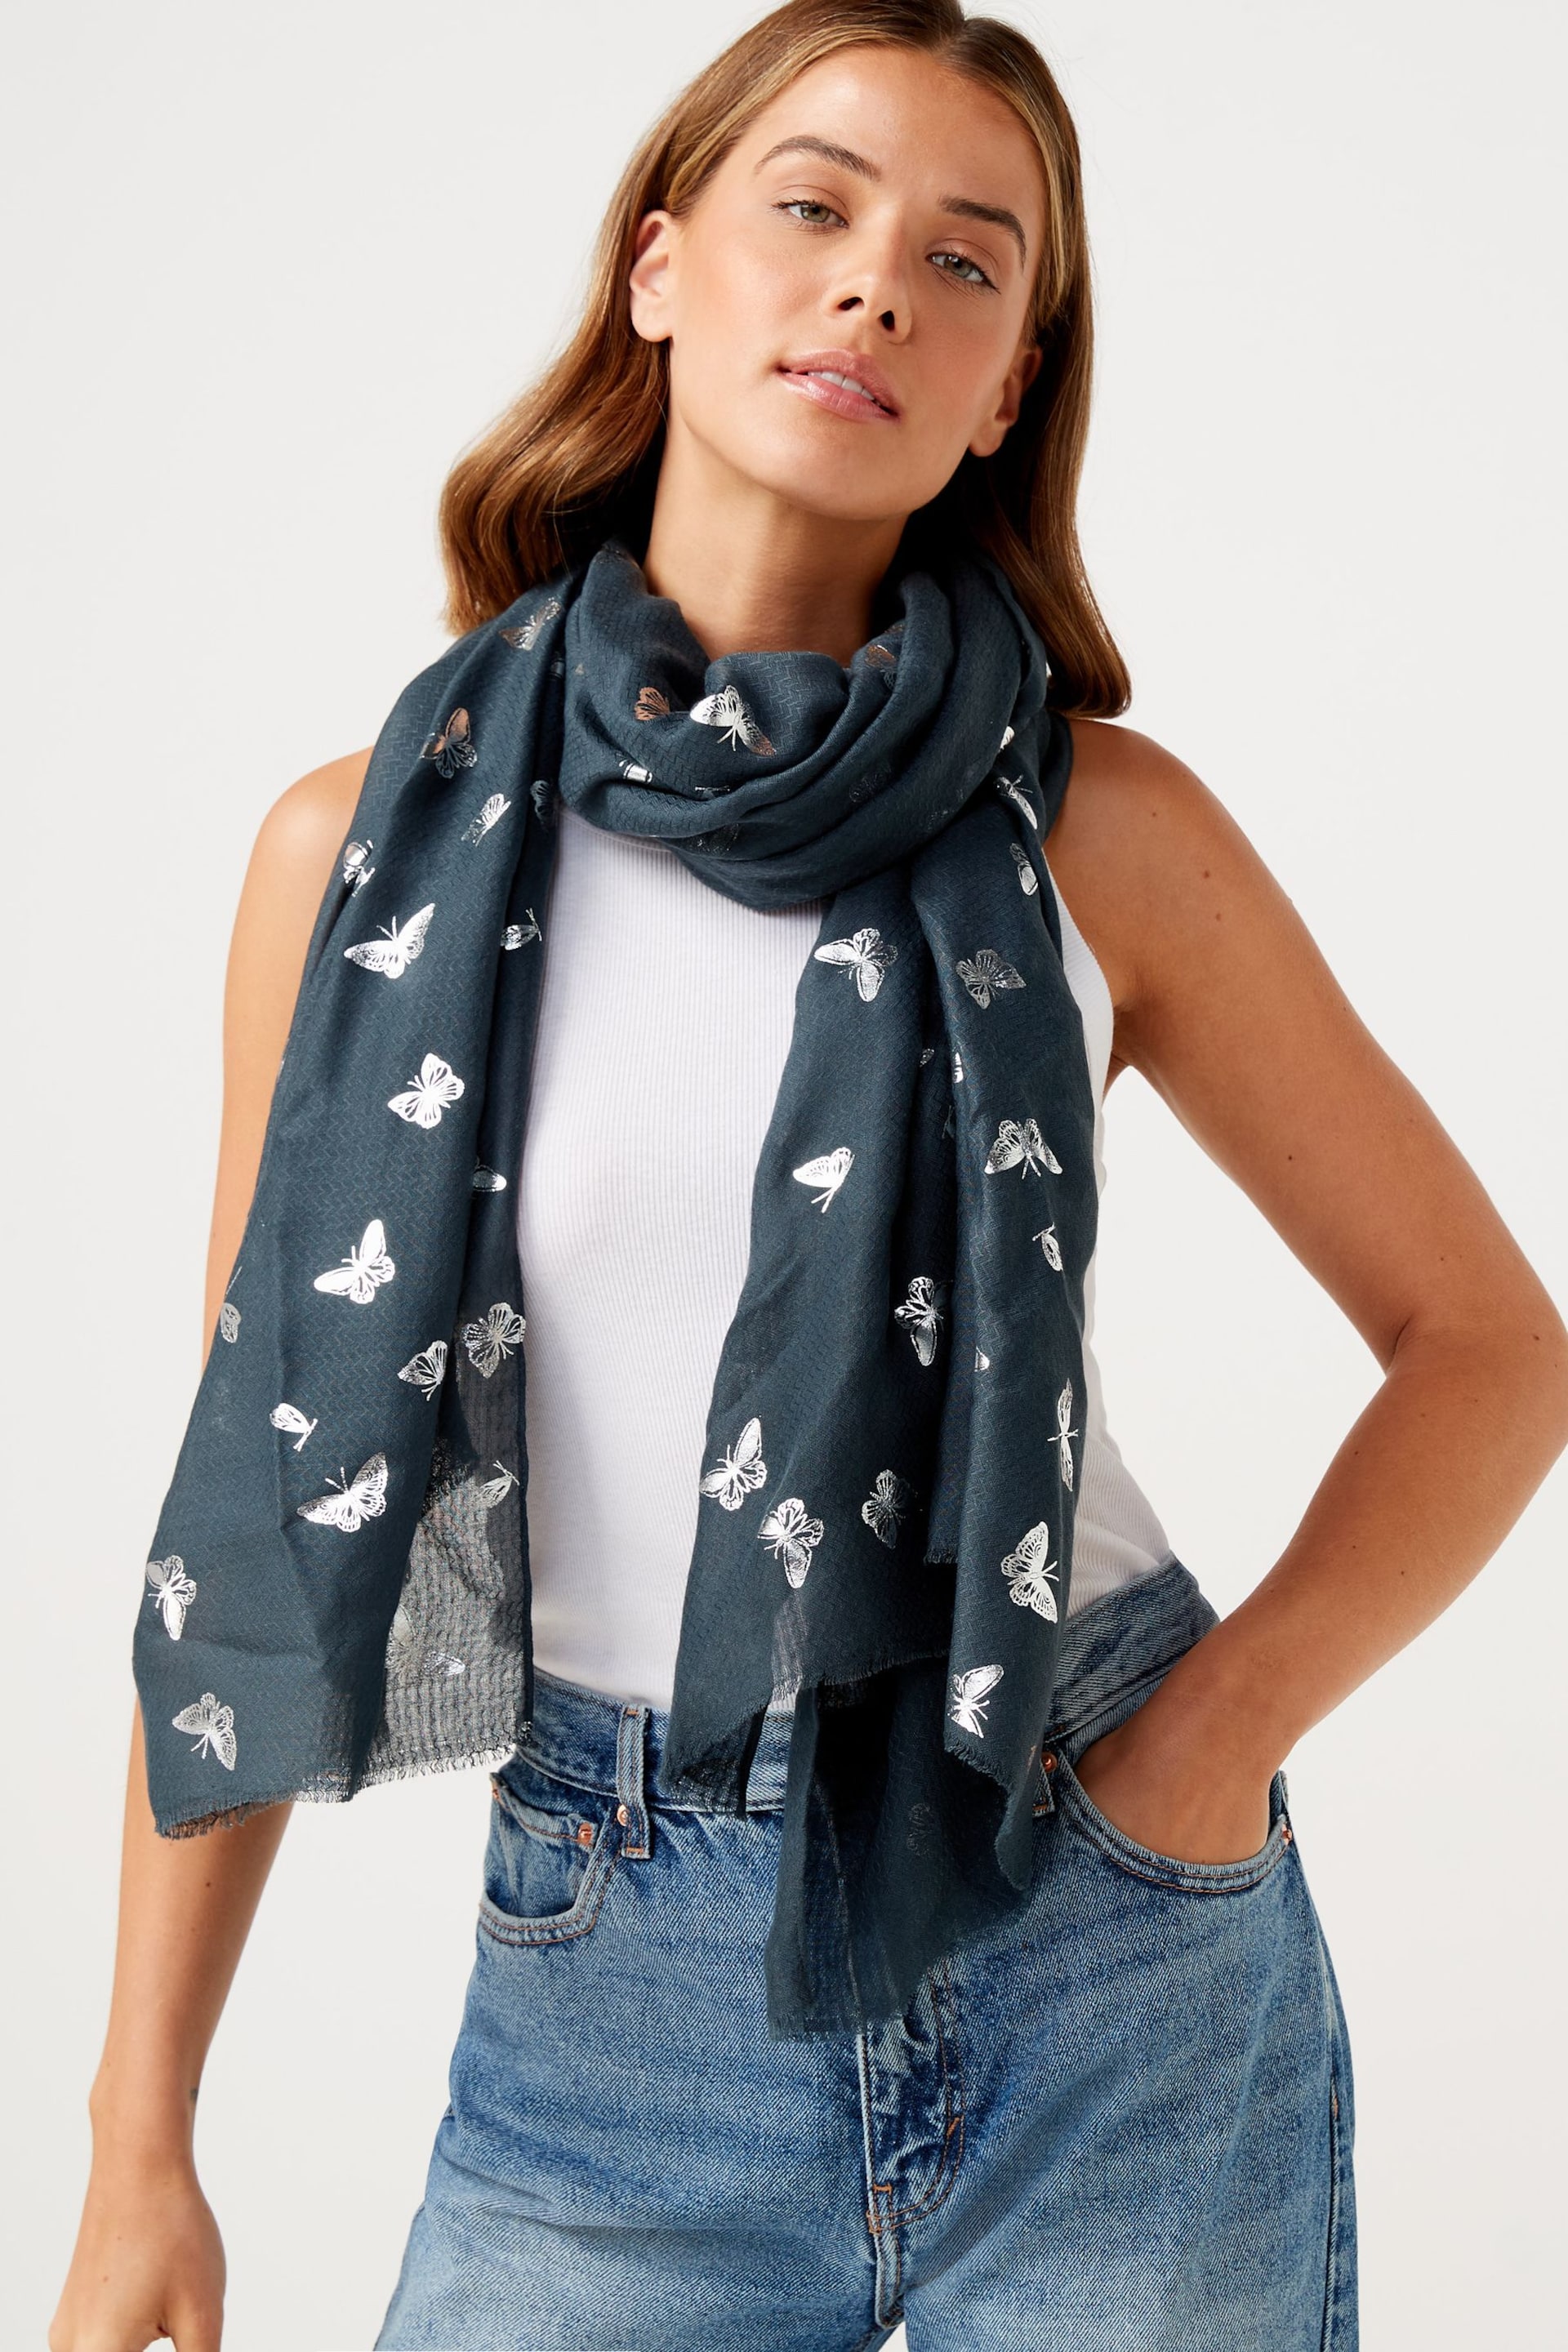 Charcoal Grey Butterfly Foil Lightweight Scarf - Image 1 of 4